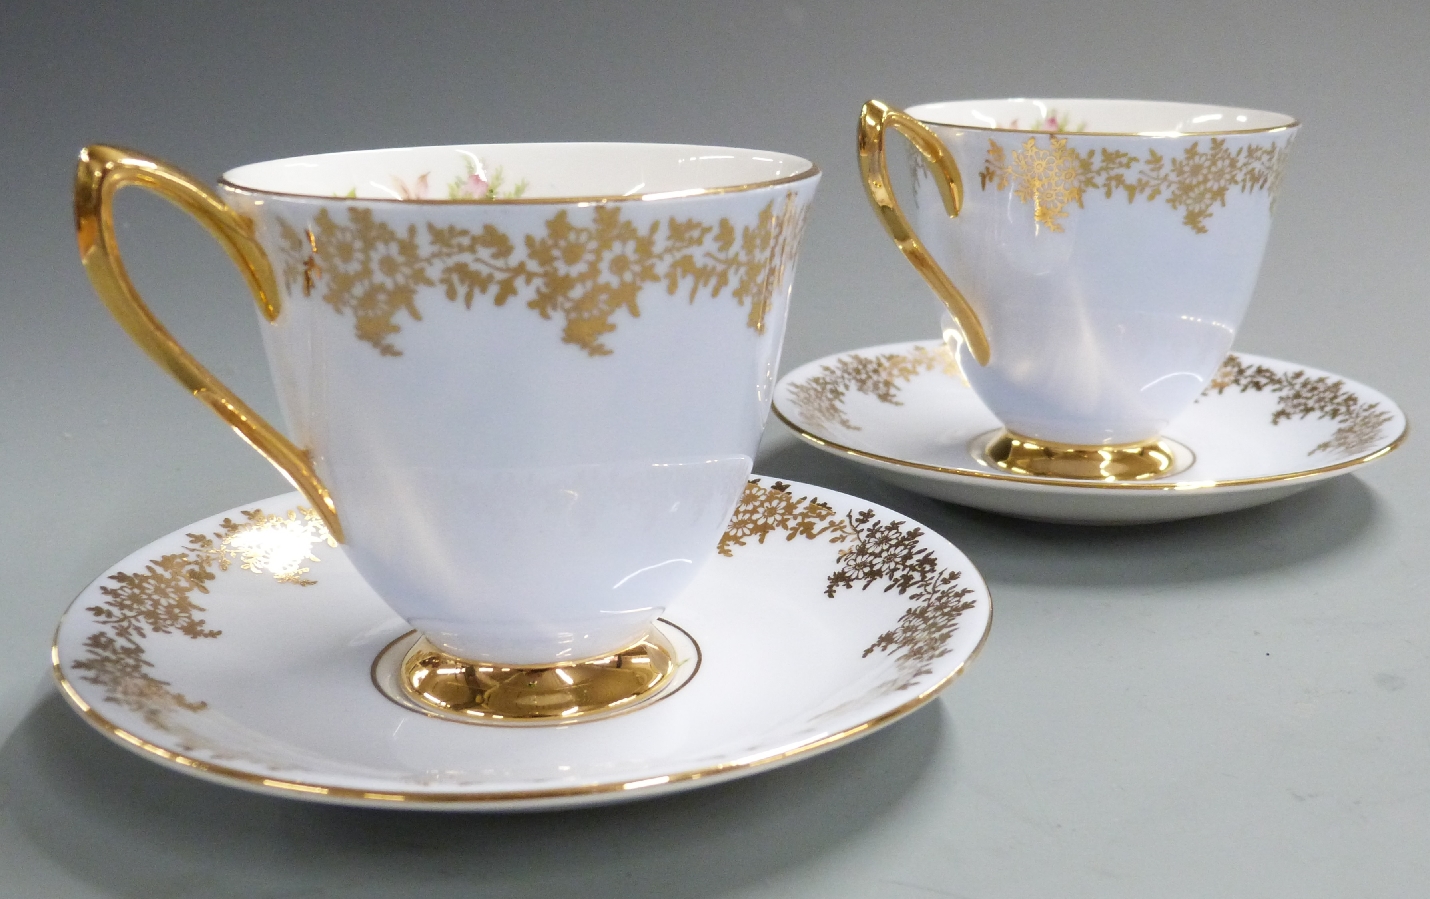 Six Royal Albert cups and saucers with gilded exterior and florally decorated interior - Image 4 of 4